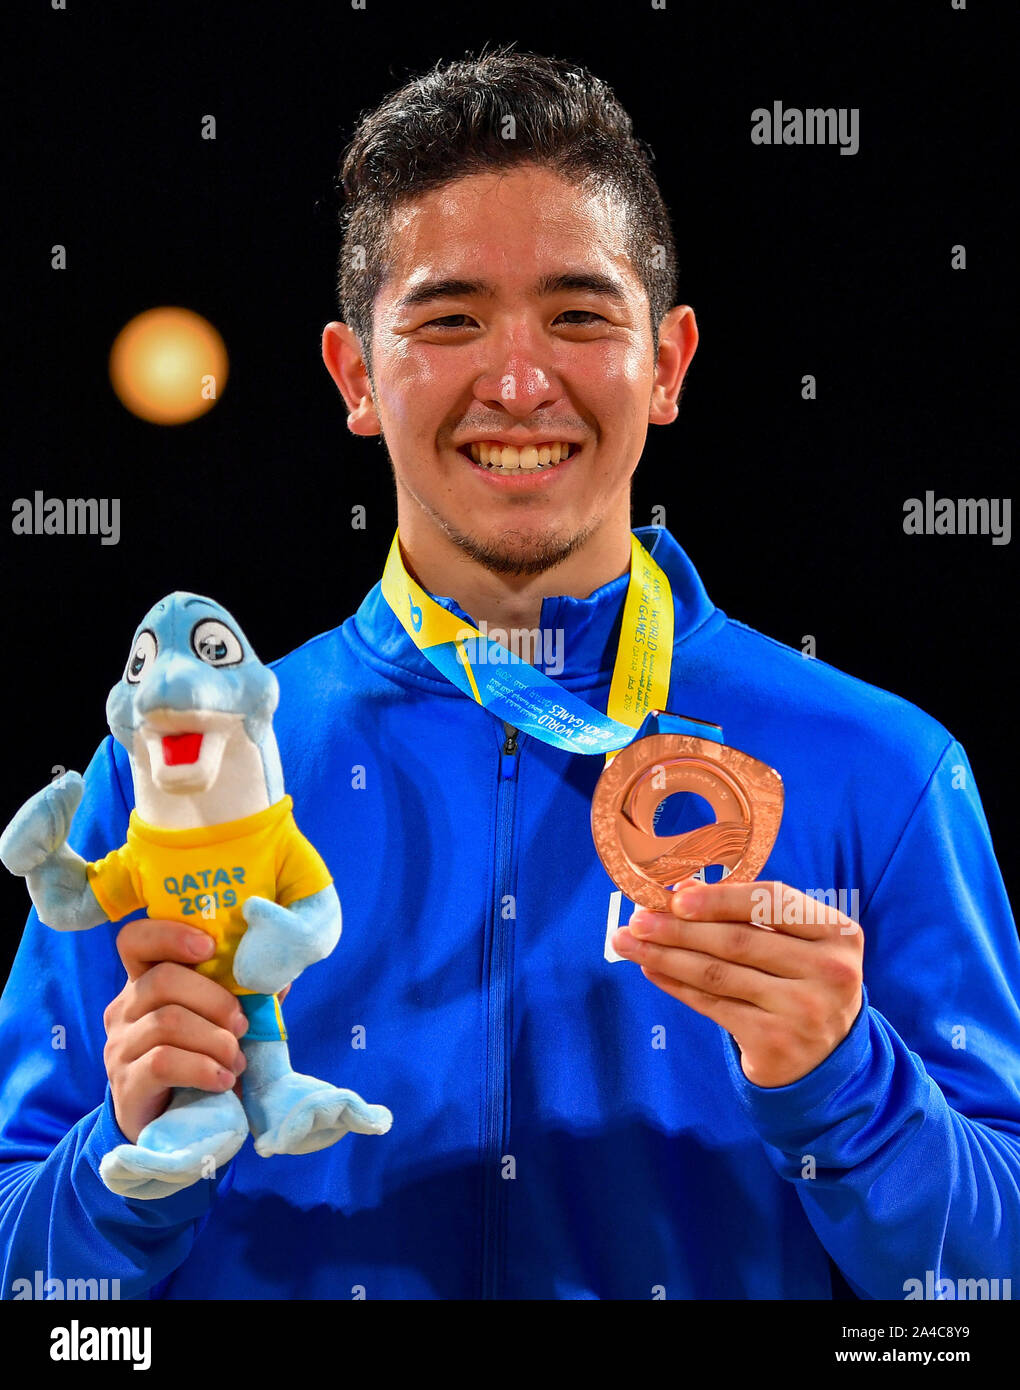 Doha, Qatar. 13th Oct, 2019. Gakuji Tozaki of the United States poses for photos during the medal ceremony of men's individual Kata event at the ANOC World Beach Games in Doha, Qatar, Oct. 13, 2019. Credit: Nikku/Xinhua/Alamy Live News Stock Photo